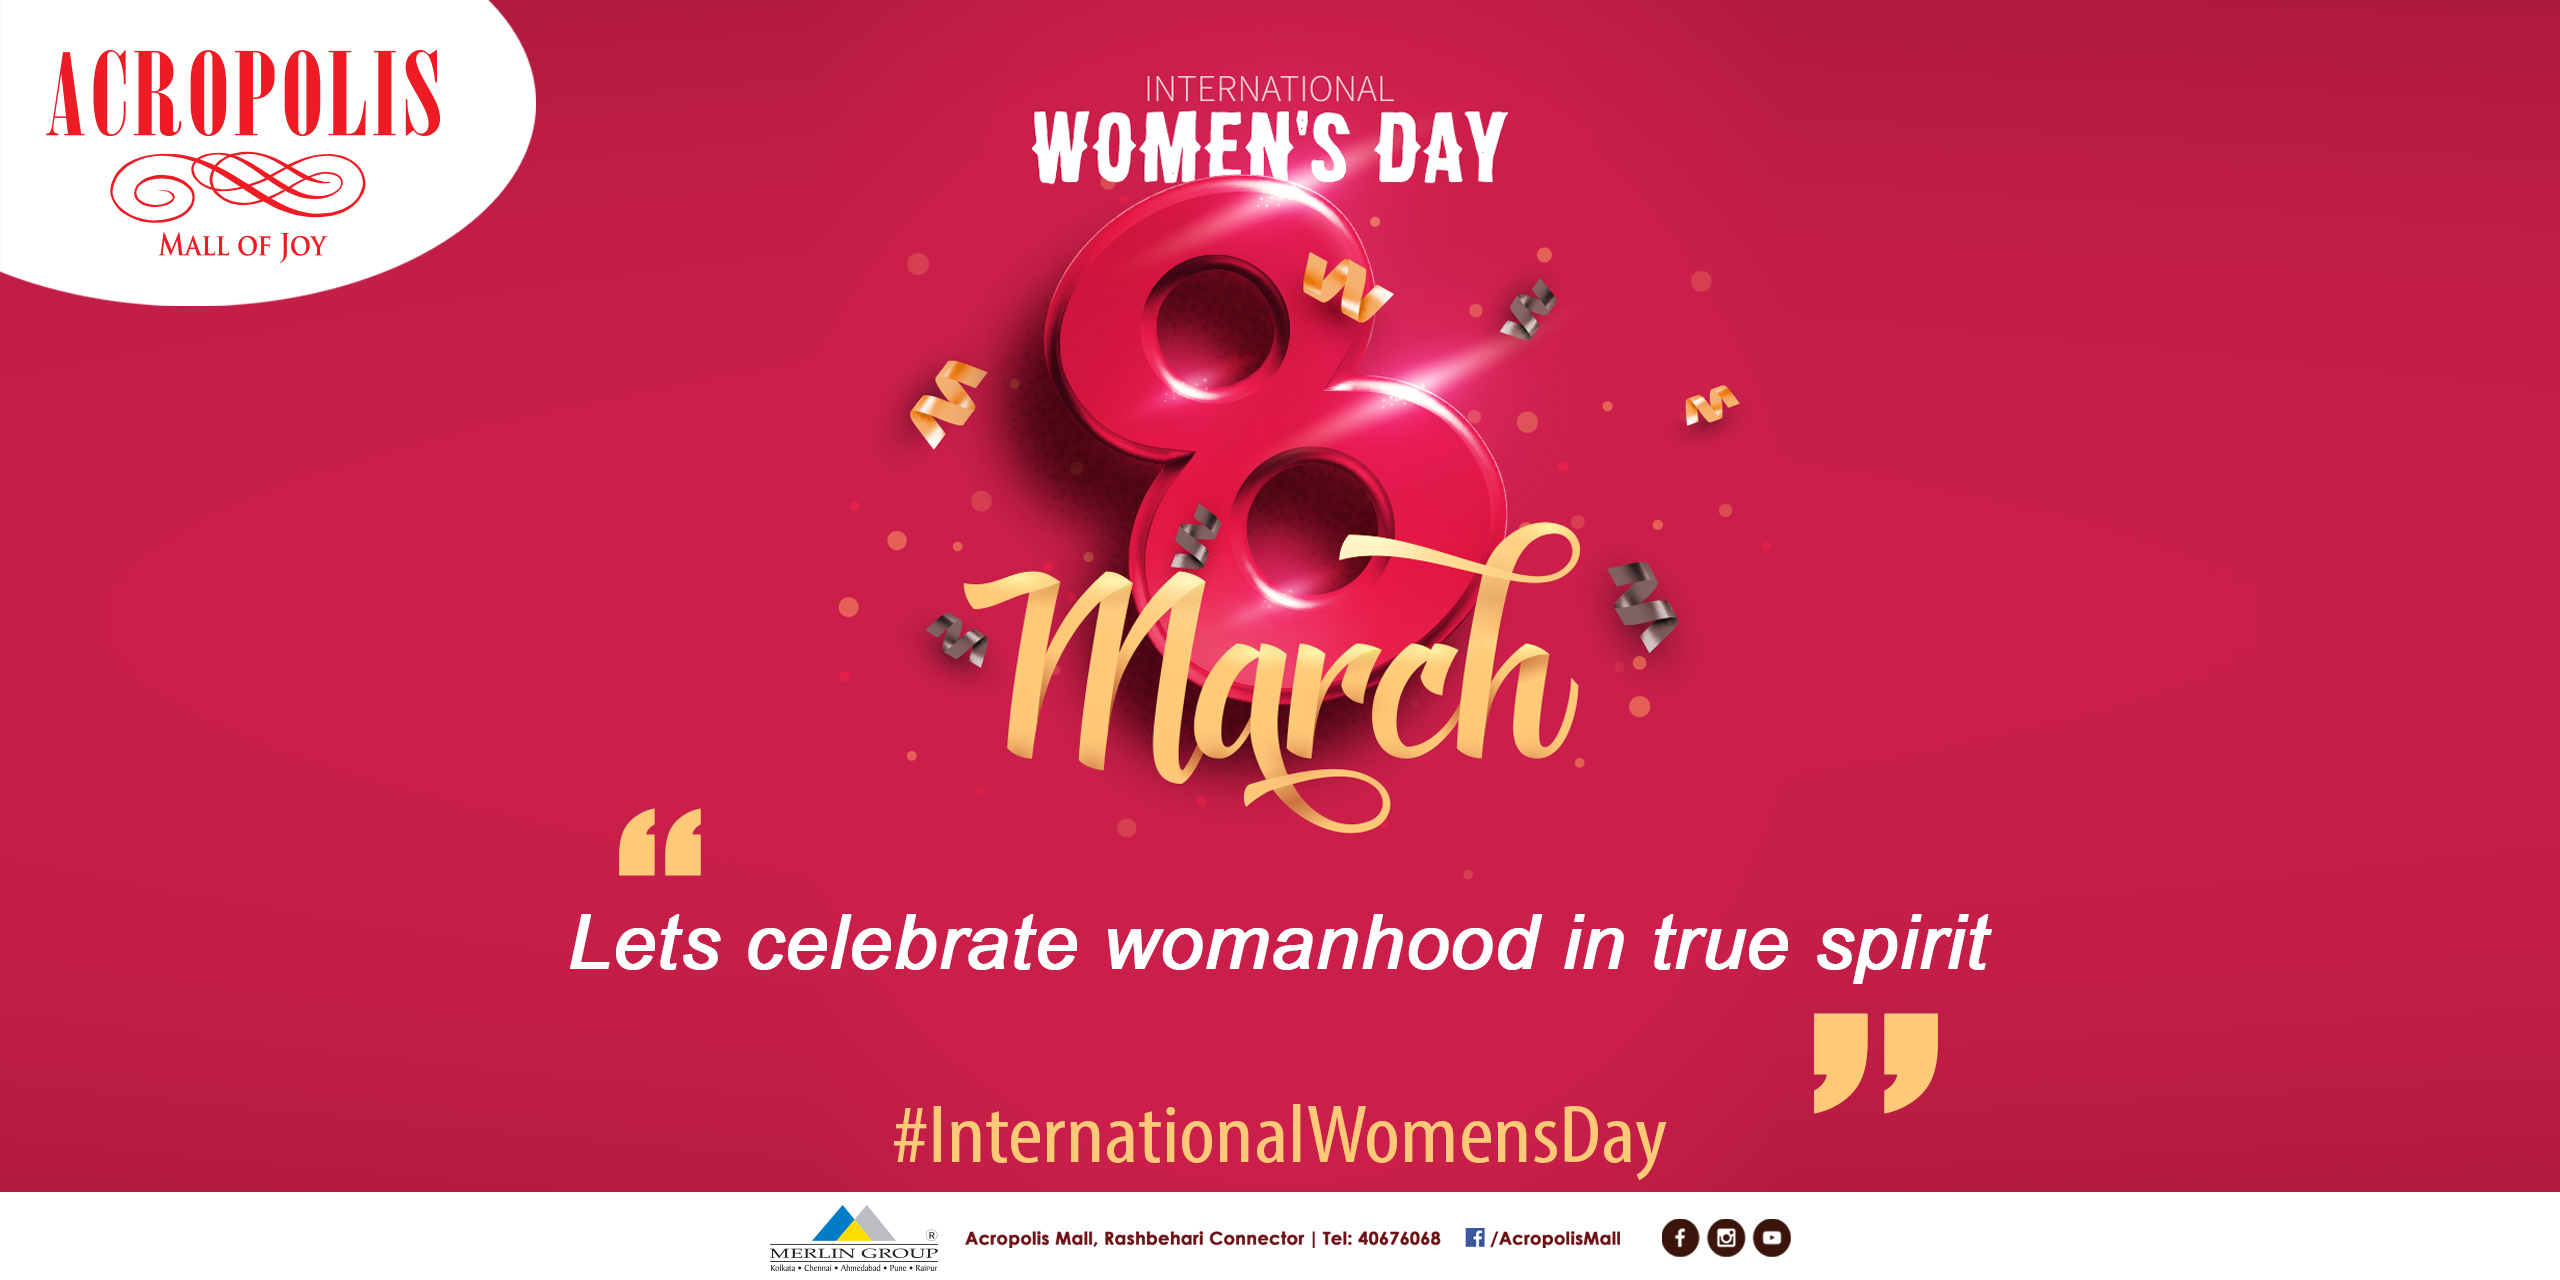 Celebrate The Women’s Day for who you are